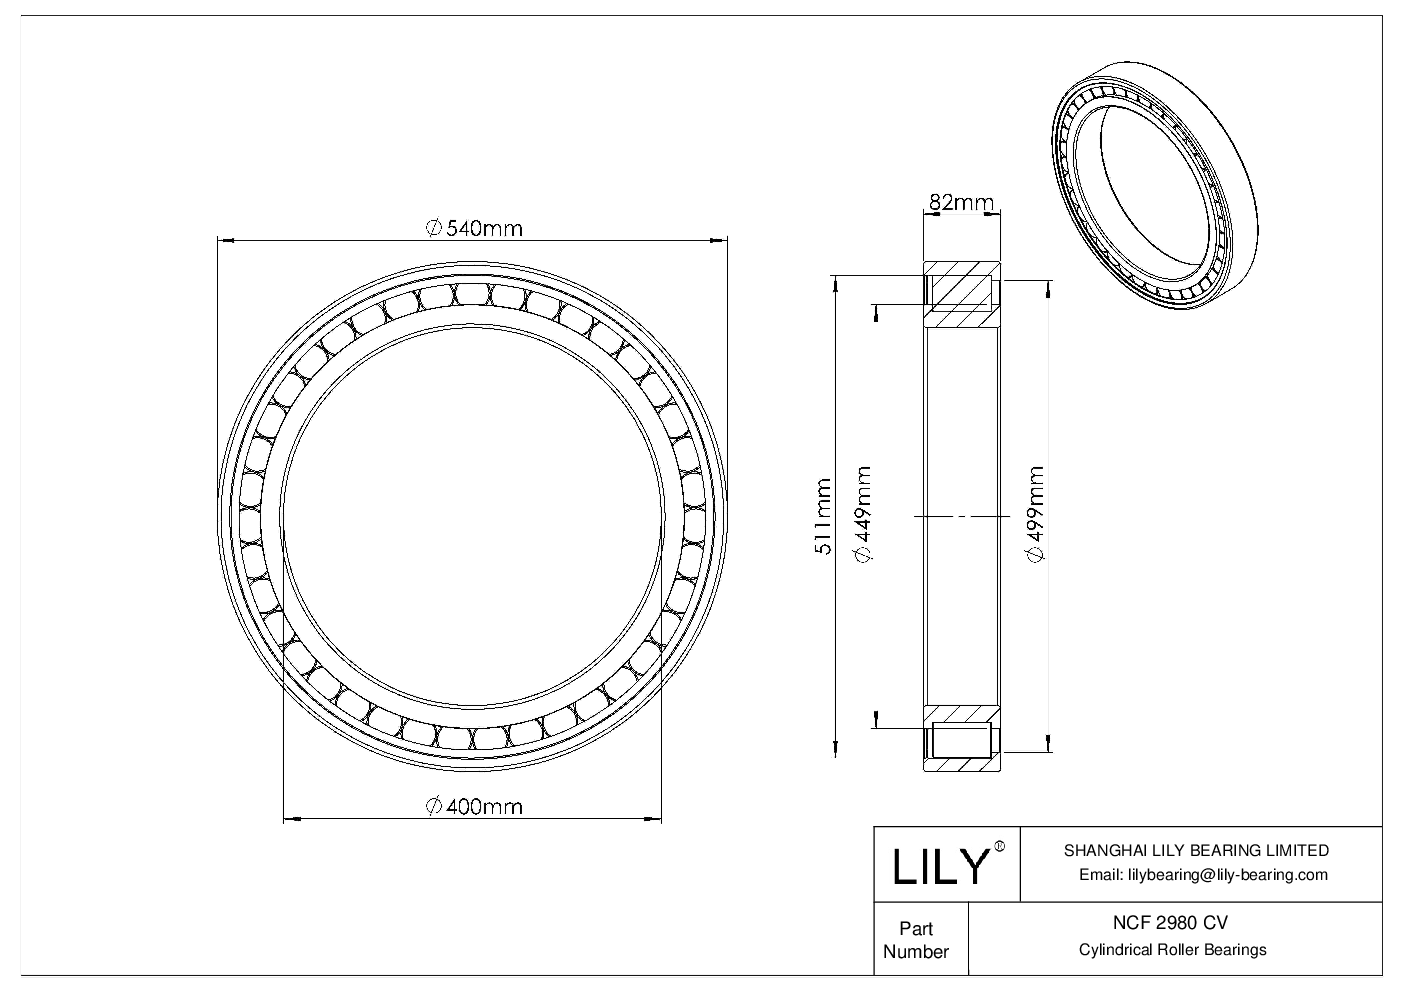 NCF 2980 CV Single Row Full Complement Cylindrical Roller Bearings cad drawing